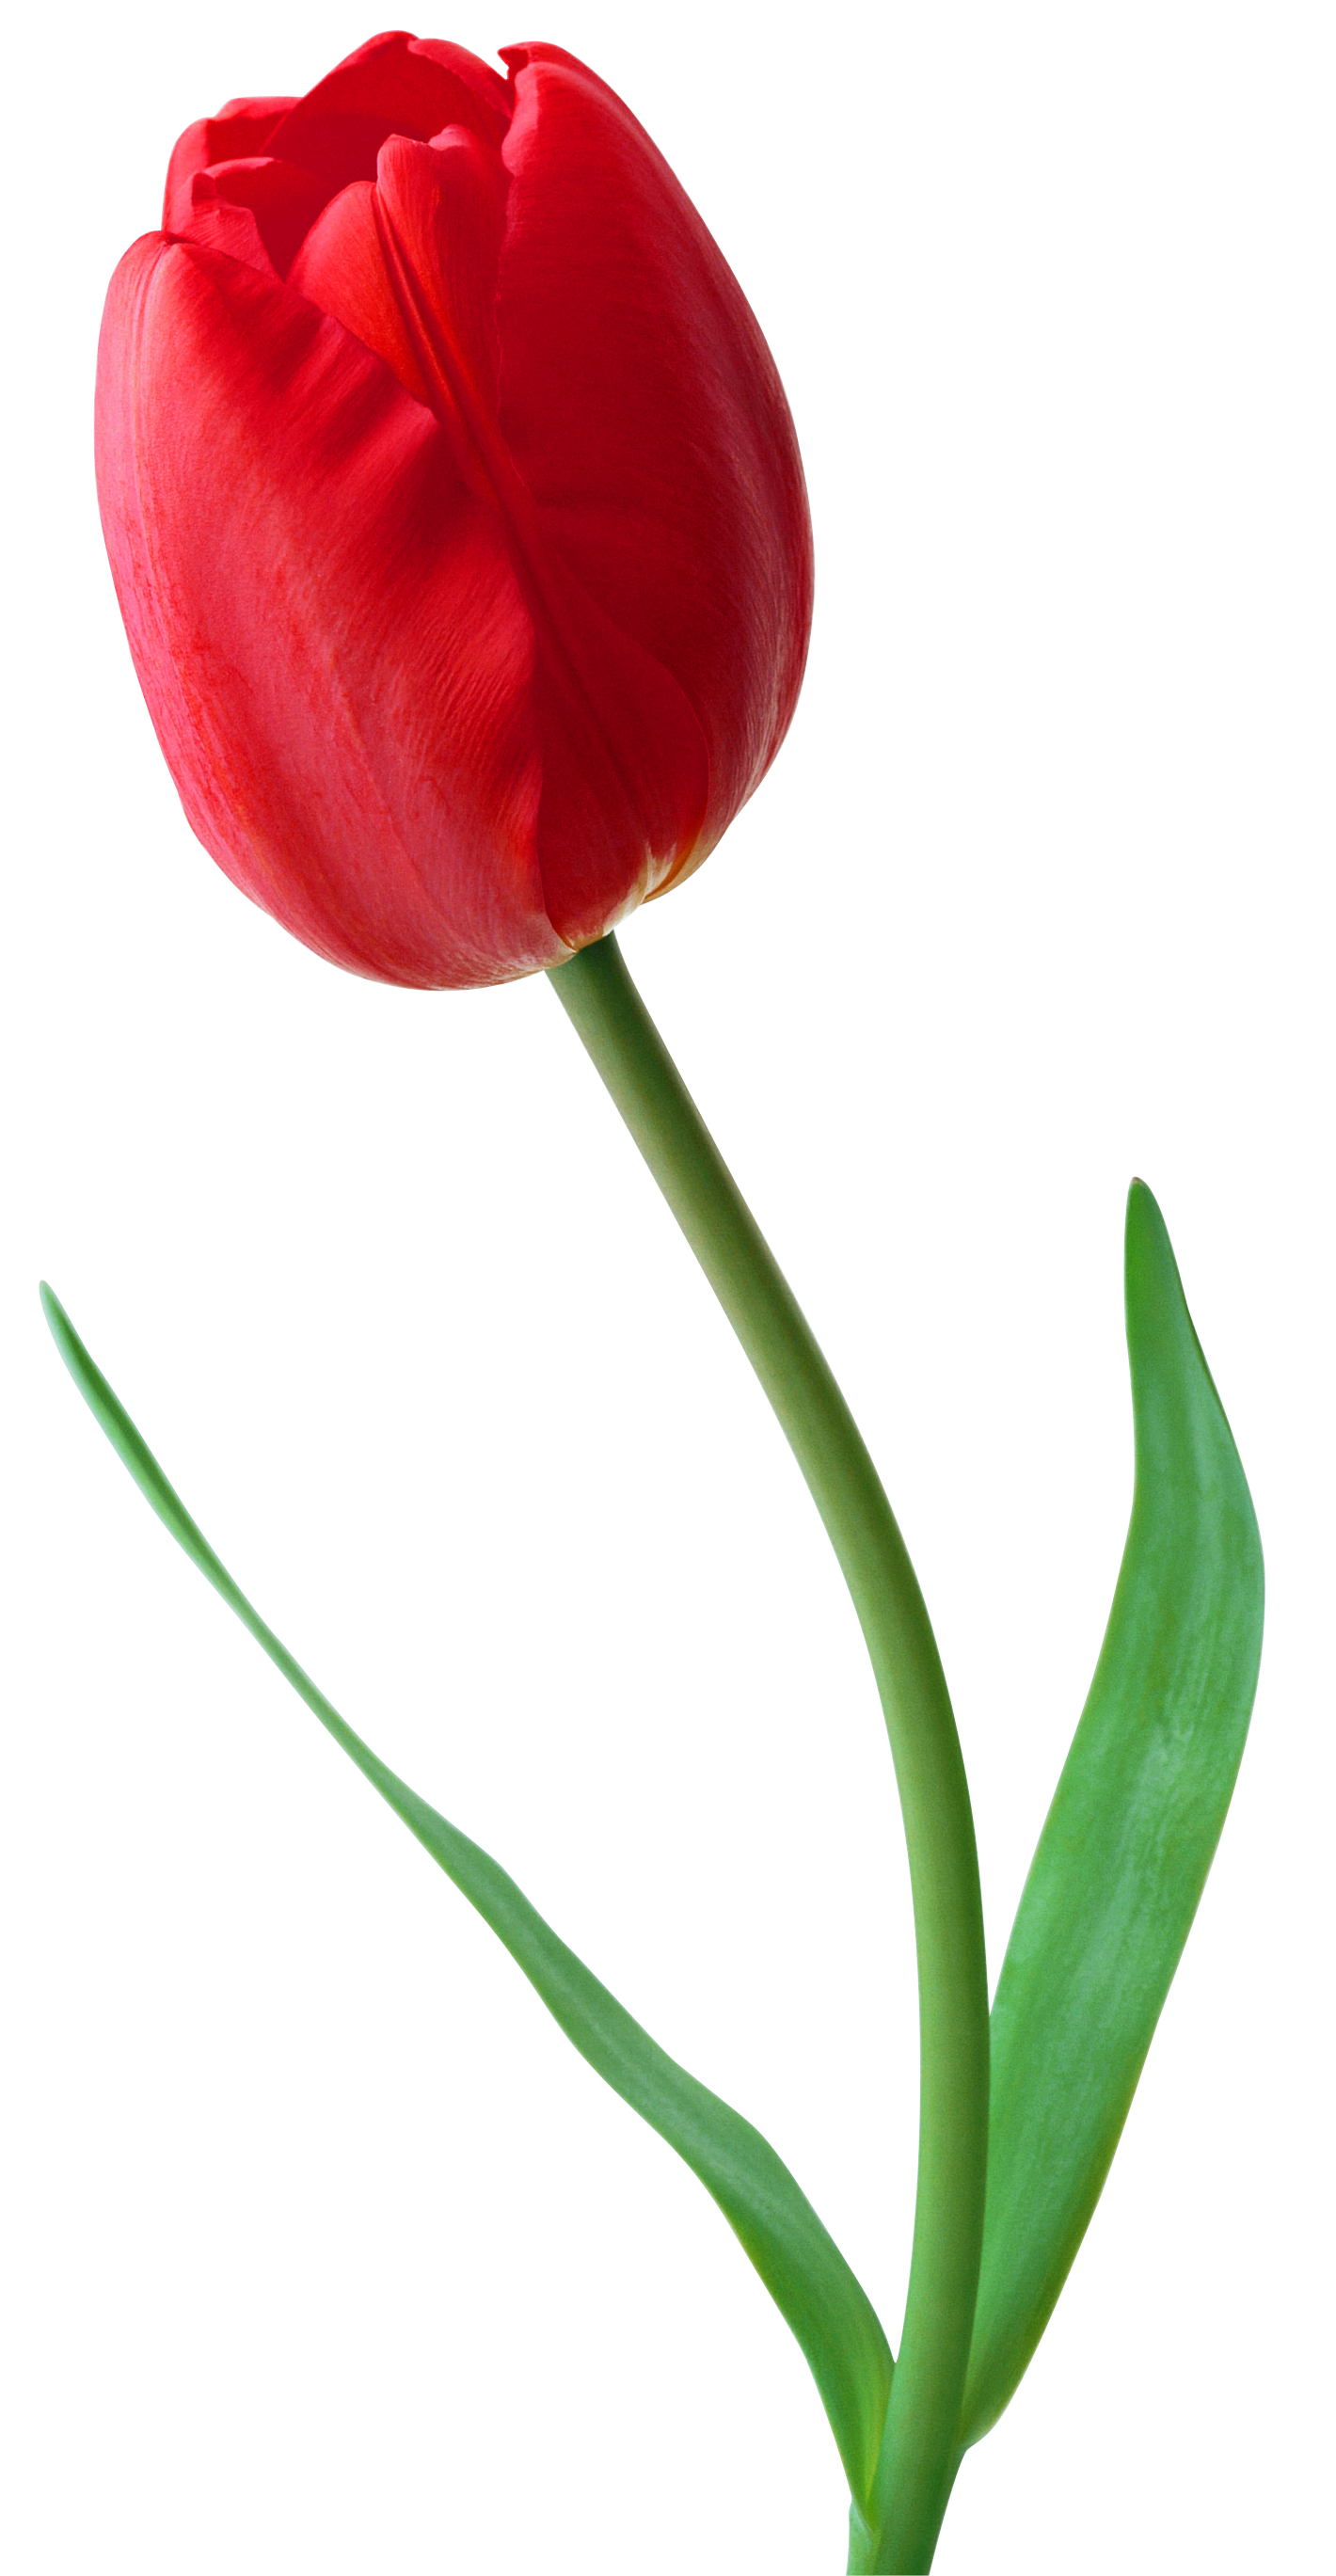 Pink Tulip Cut Out PNG Stock 